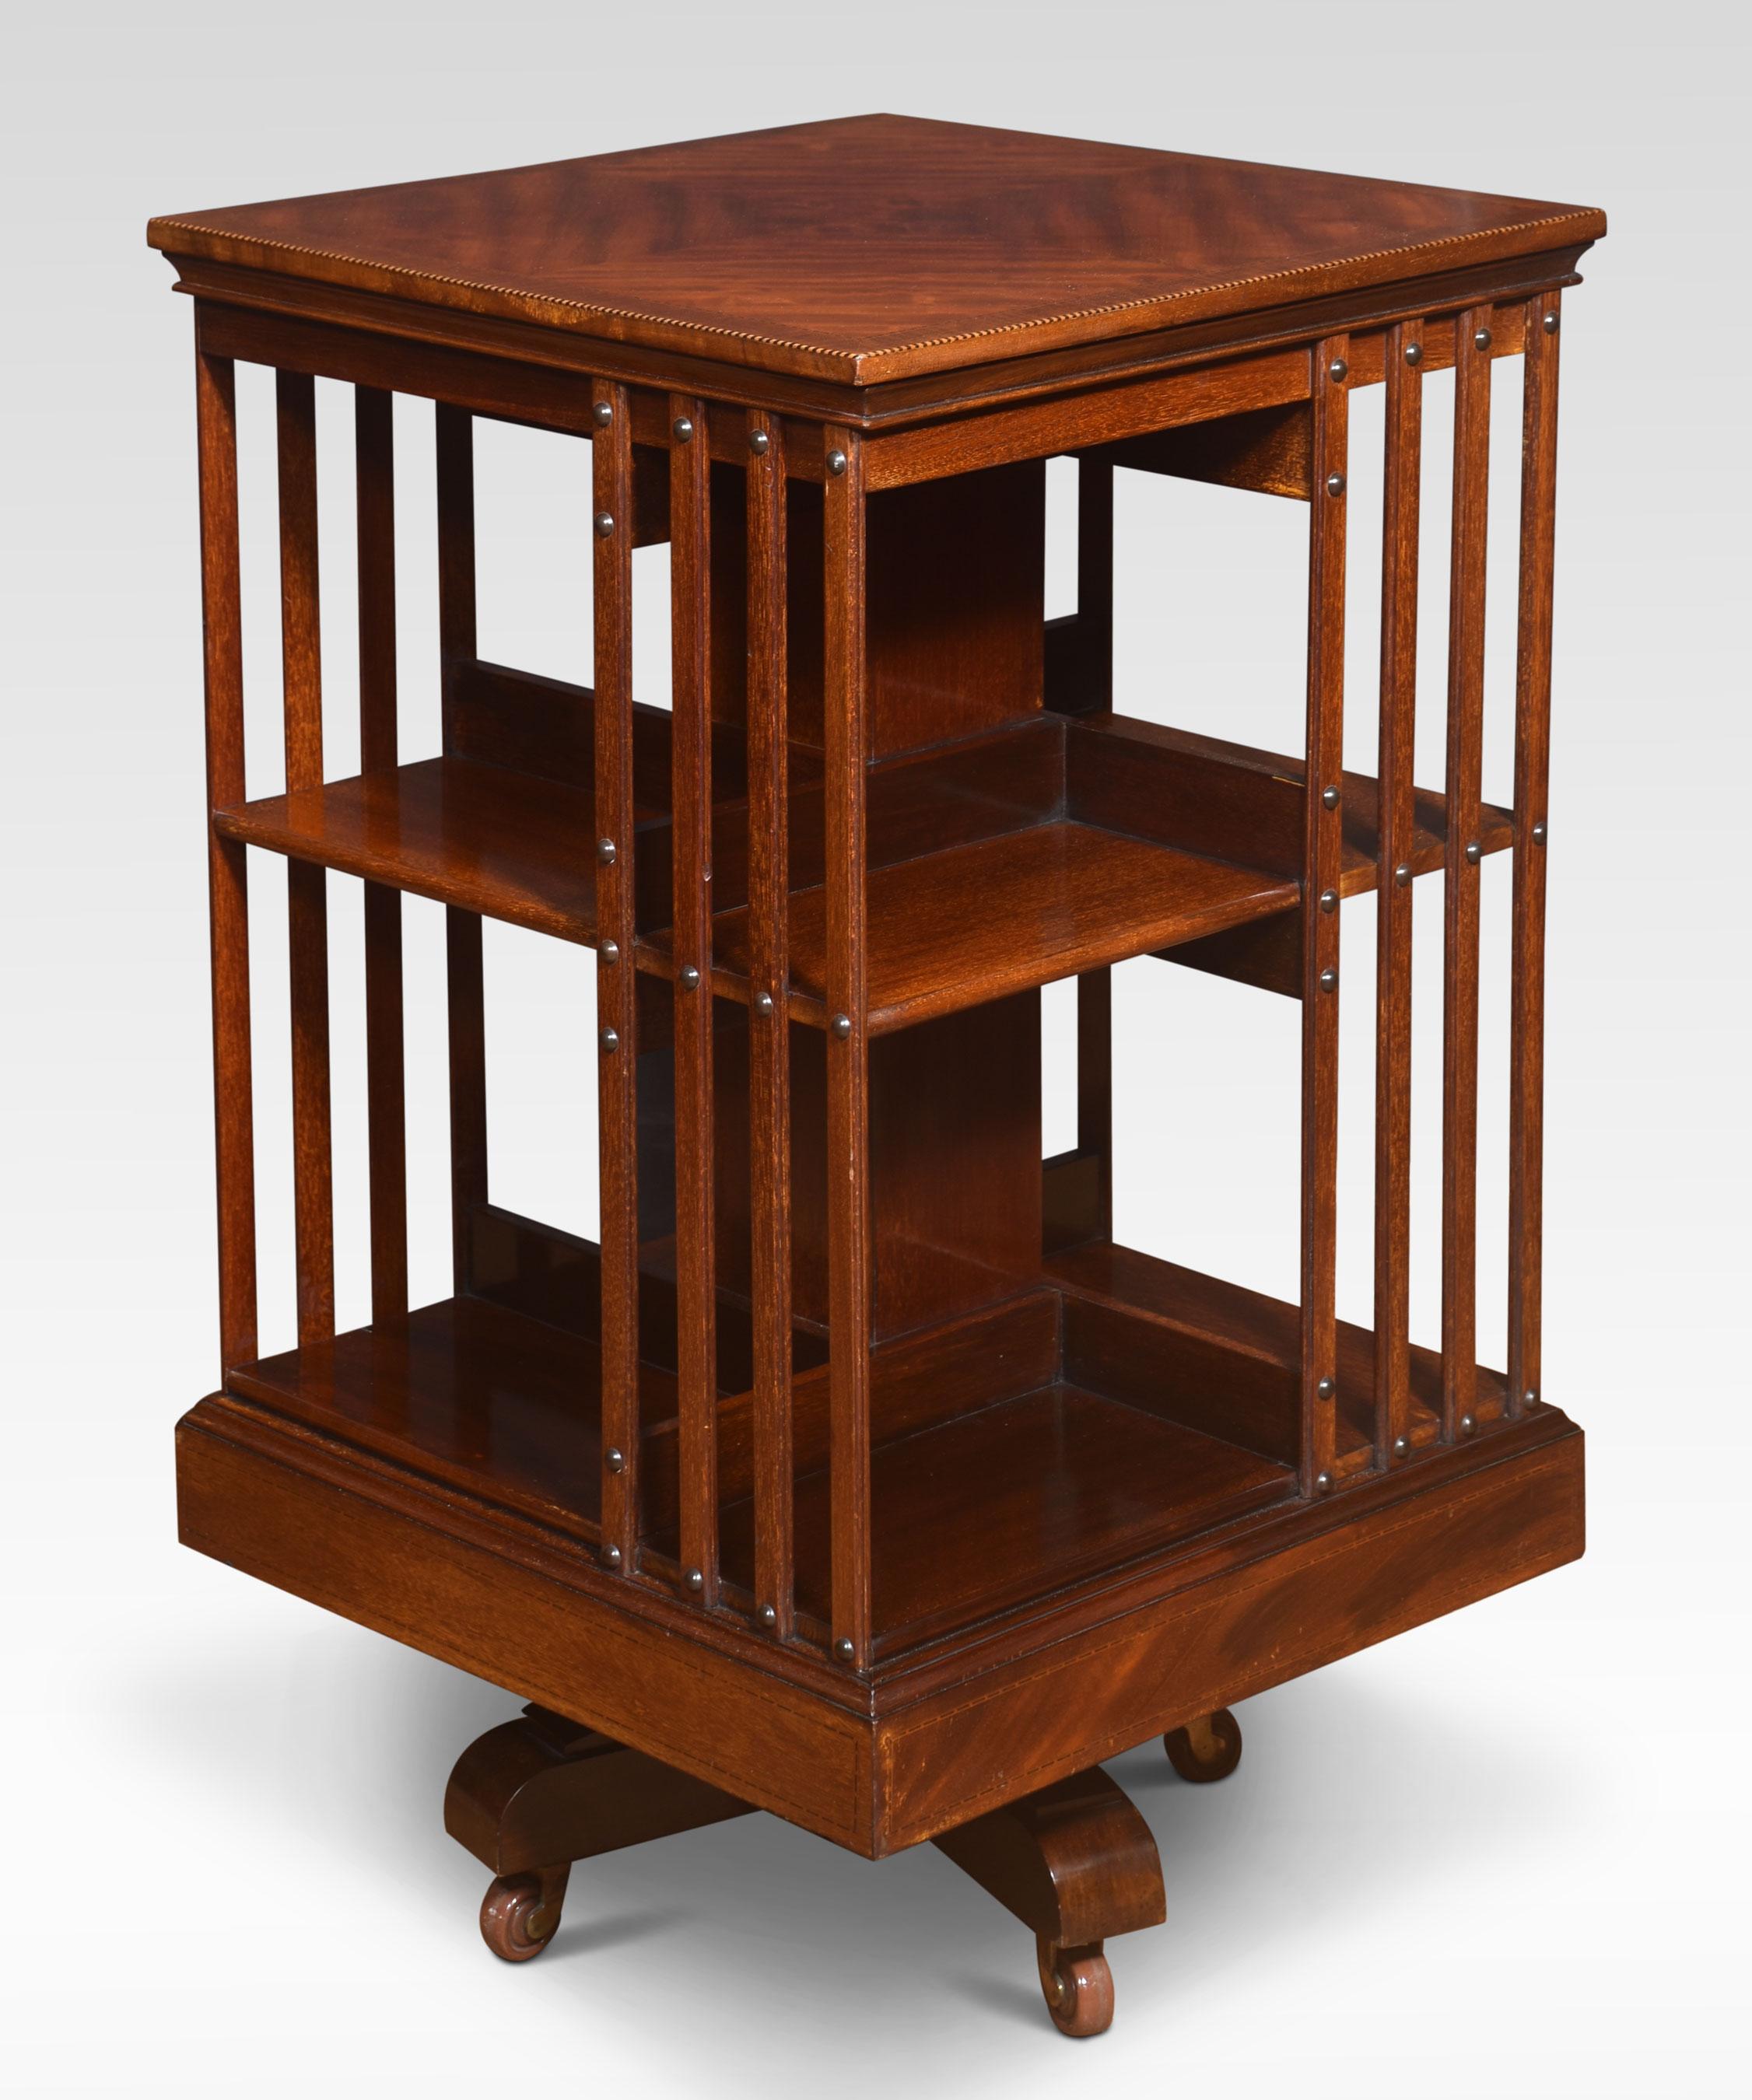 Mahogany revolving bookcase the well-figured top. Above an arrangement of shelves raised up on a cruciform base with ceramic castors.
Dimensions
Height 34 Inches
Width 20 Inches
Depth 20 Inches